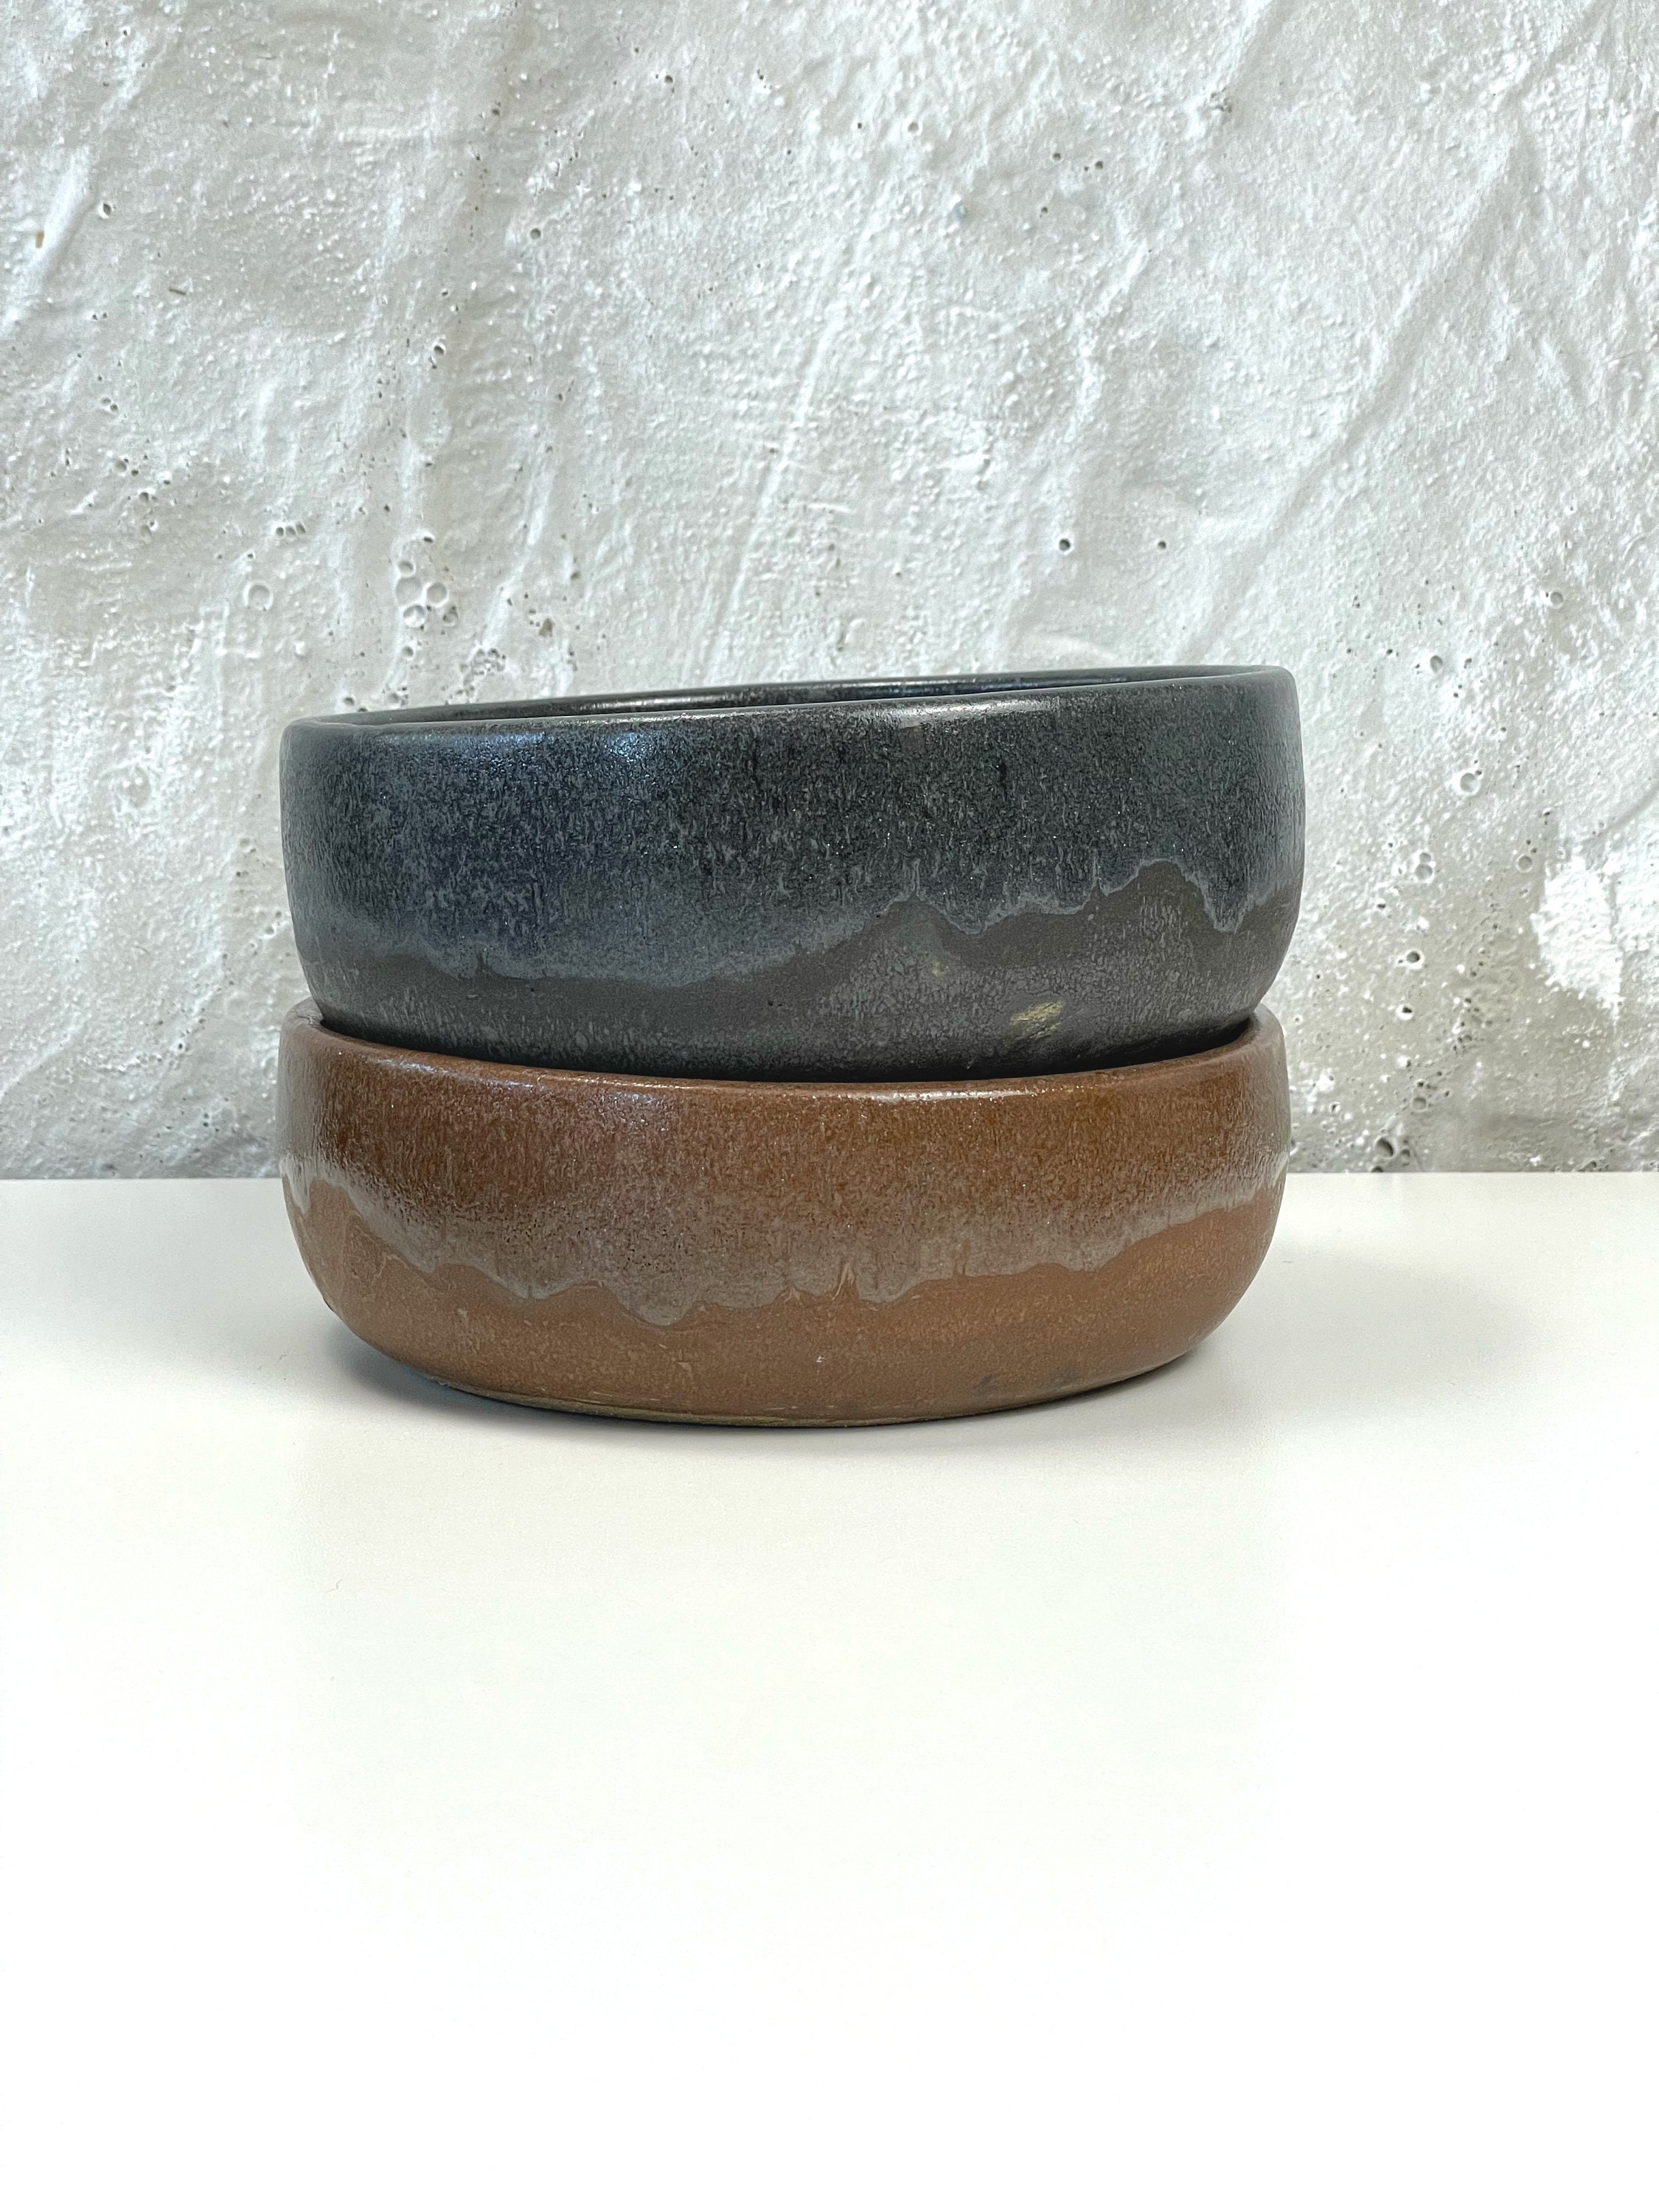 Handcrafted Dog Bowl Set, Gray Stoneware with Paw Print